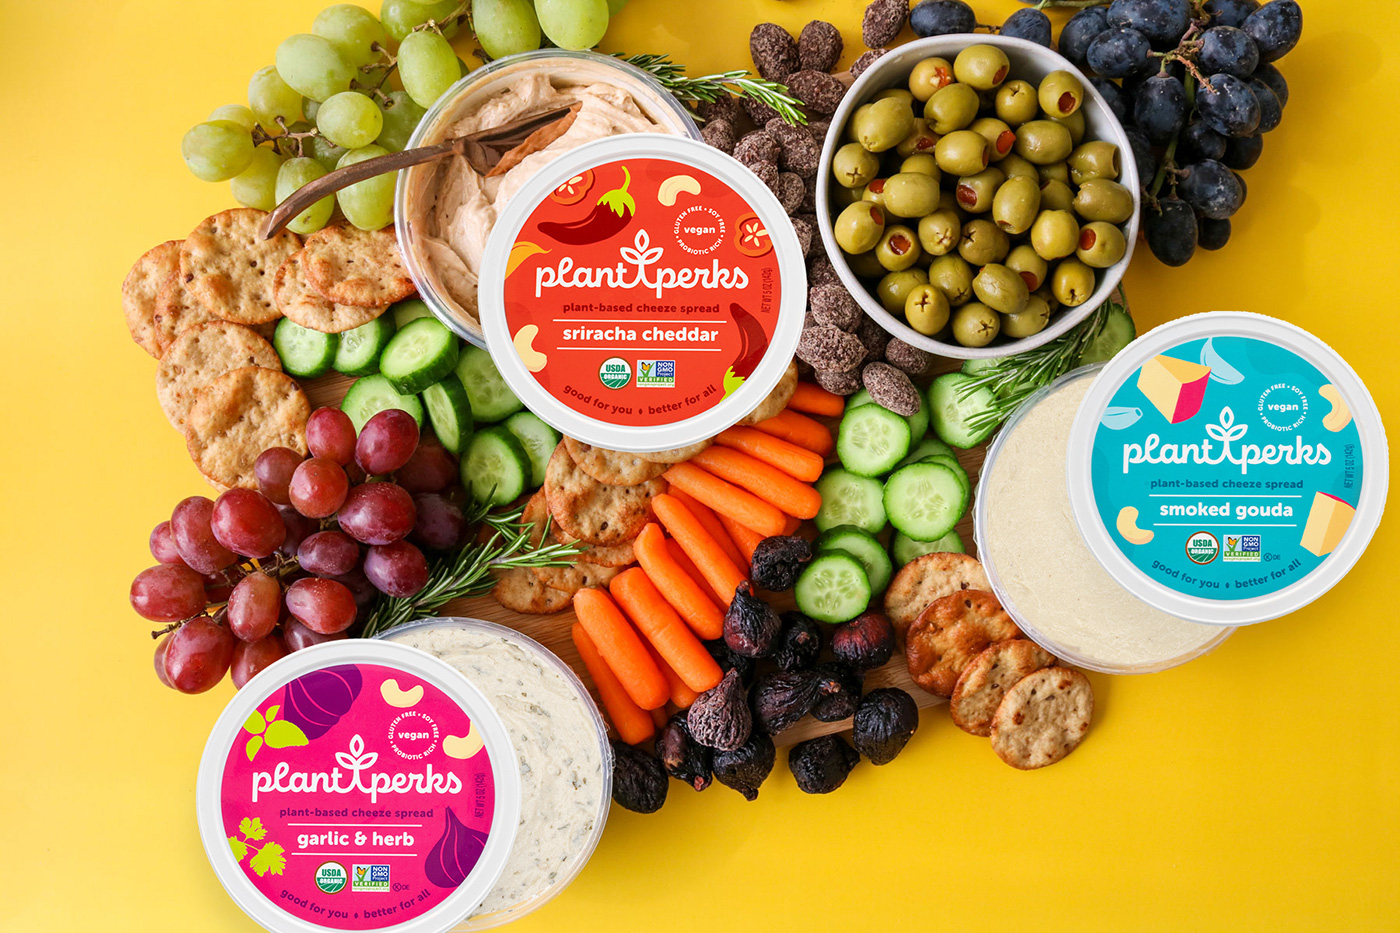 Different flavors of Plant Perks' cheese spreads